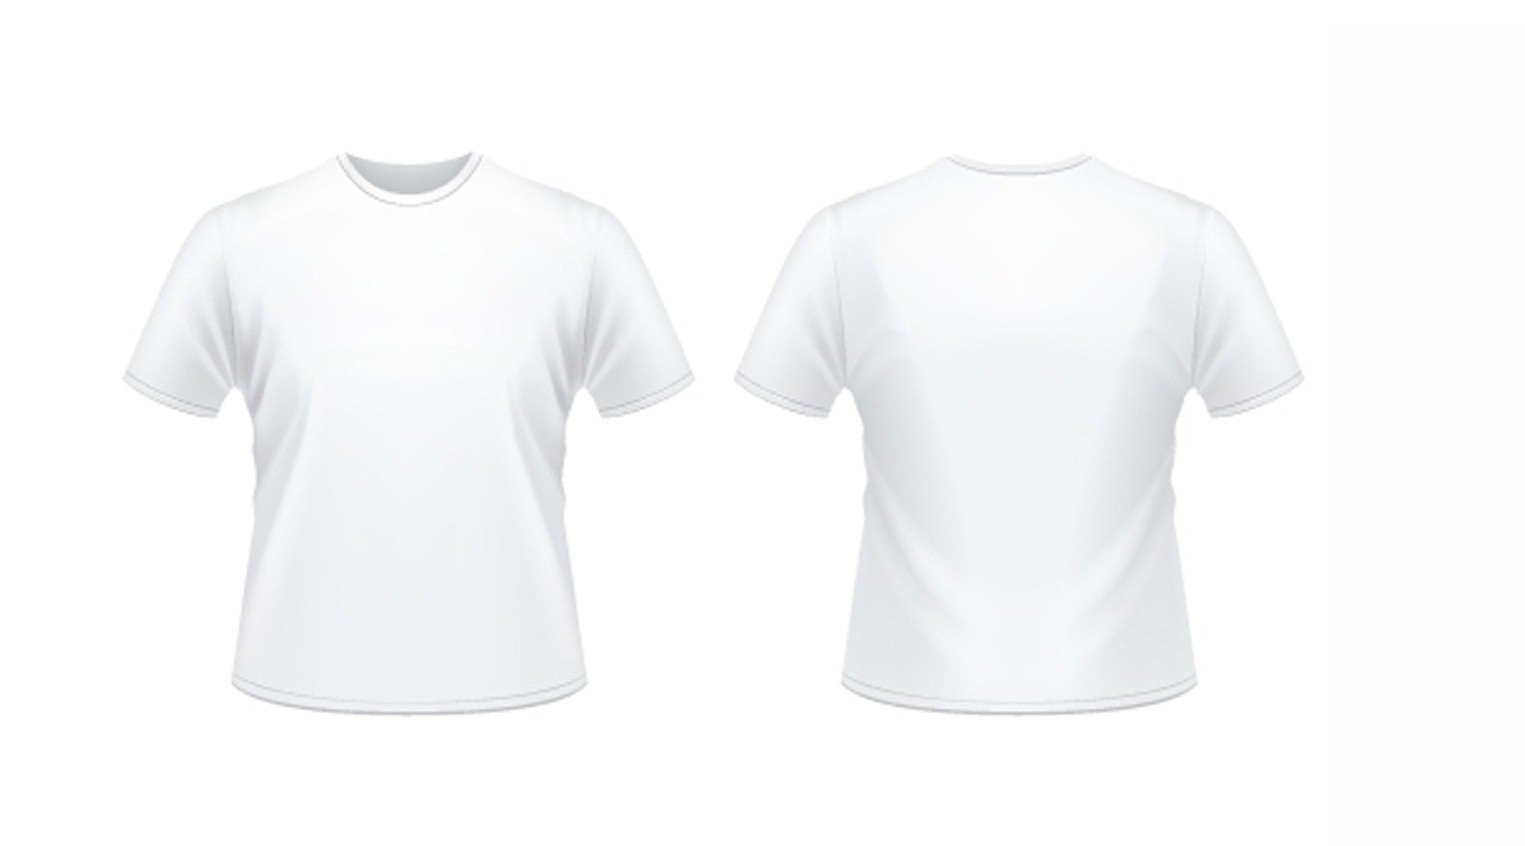 Free Tshirt Template, Download Free Tshirt Template png images, Free ...